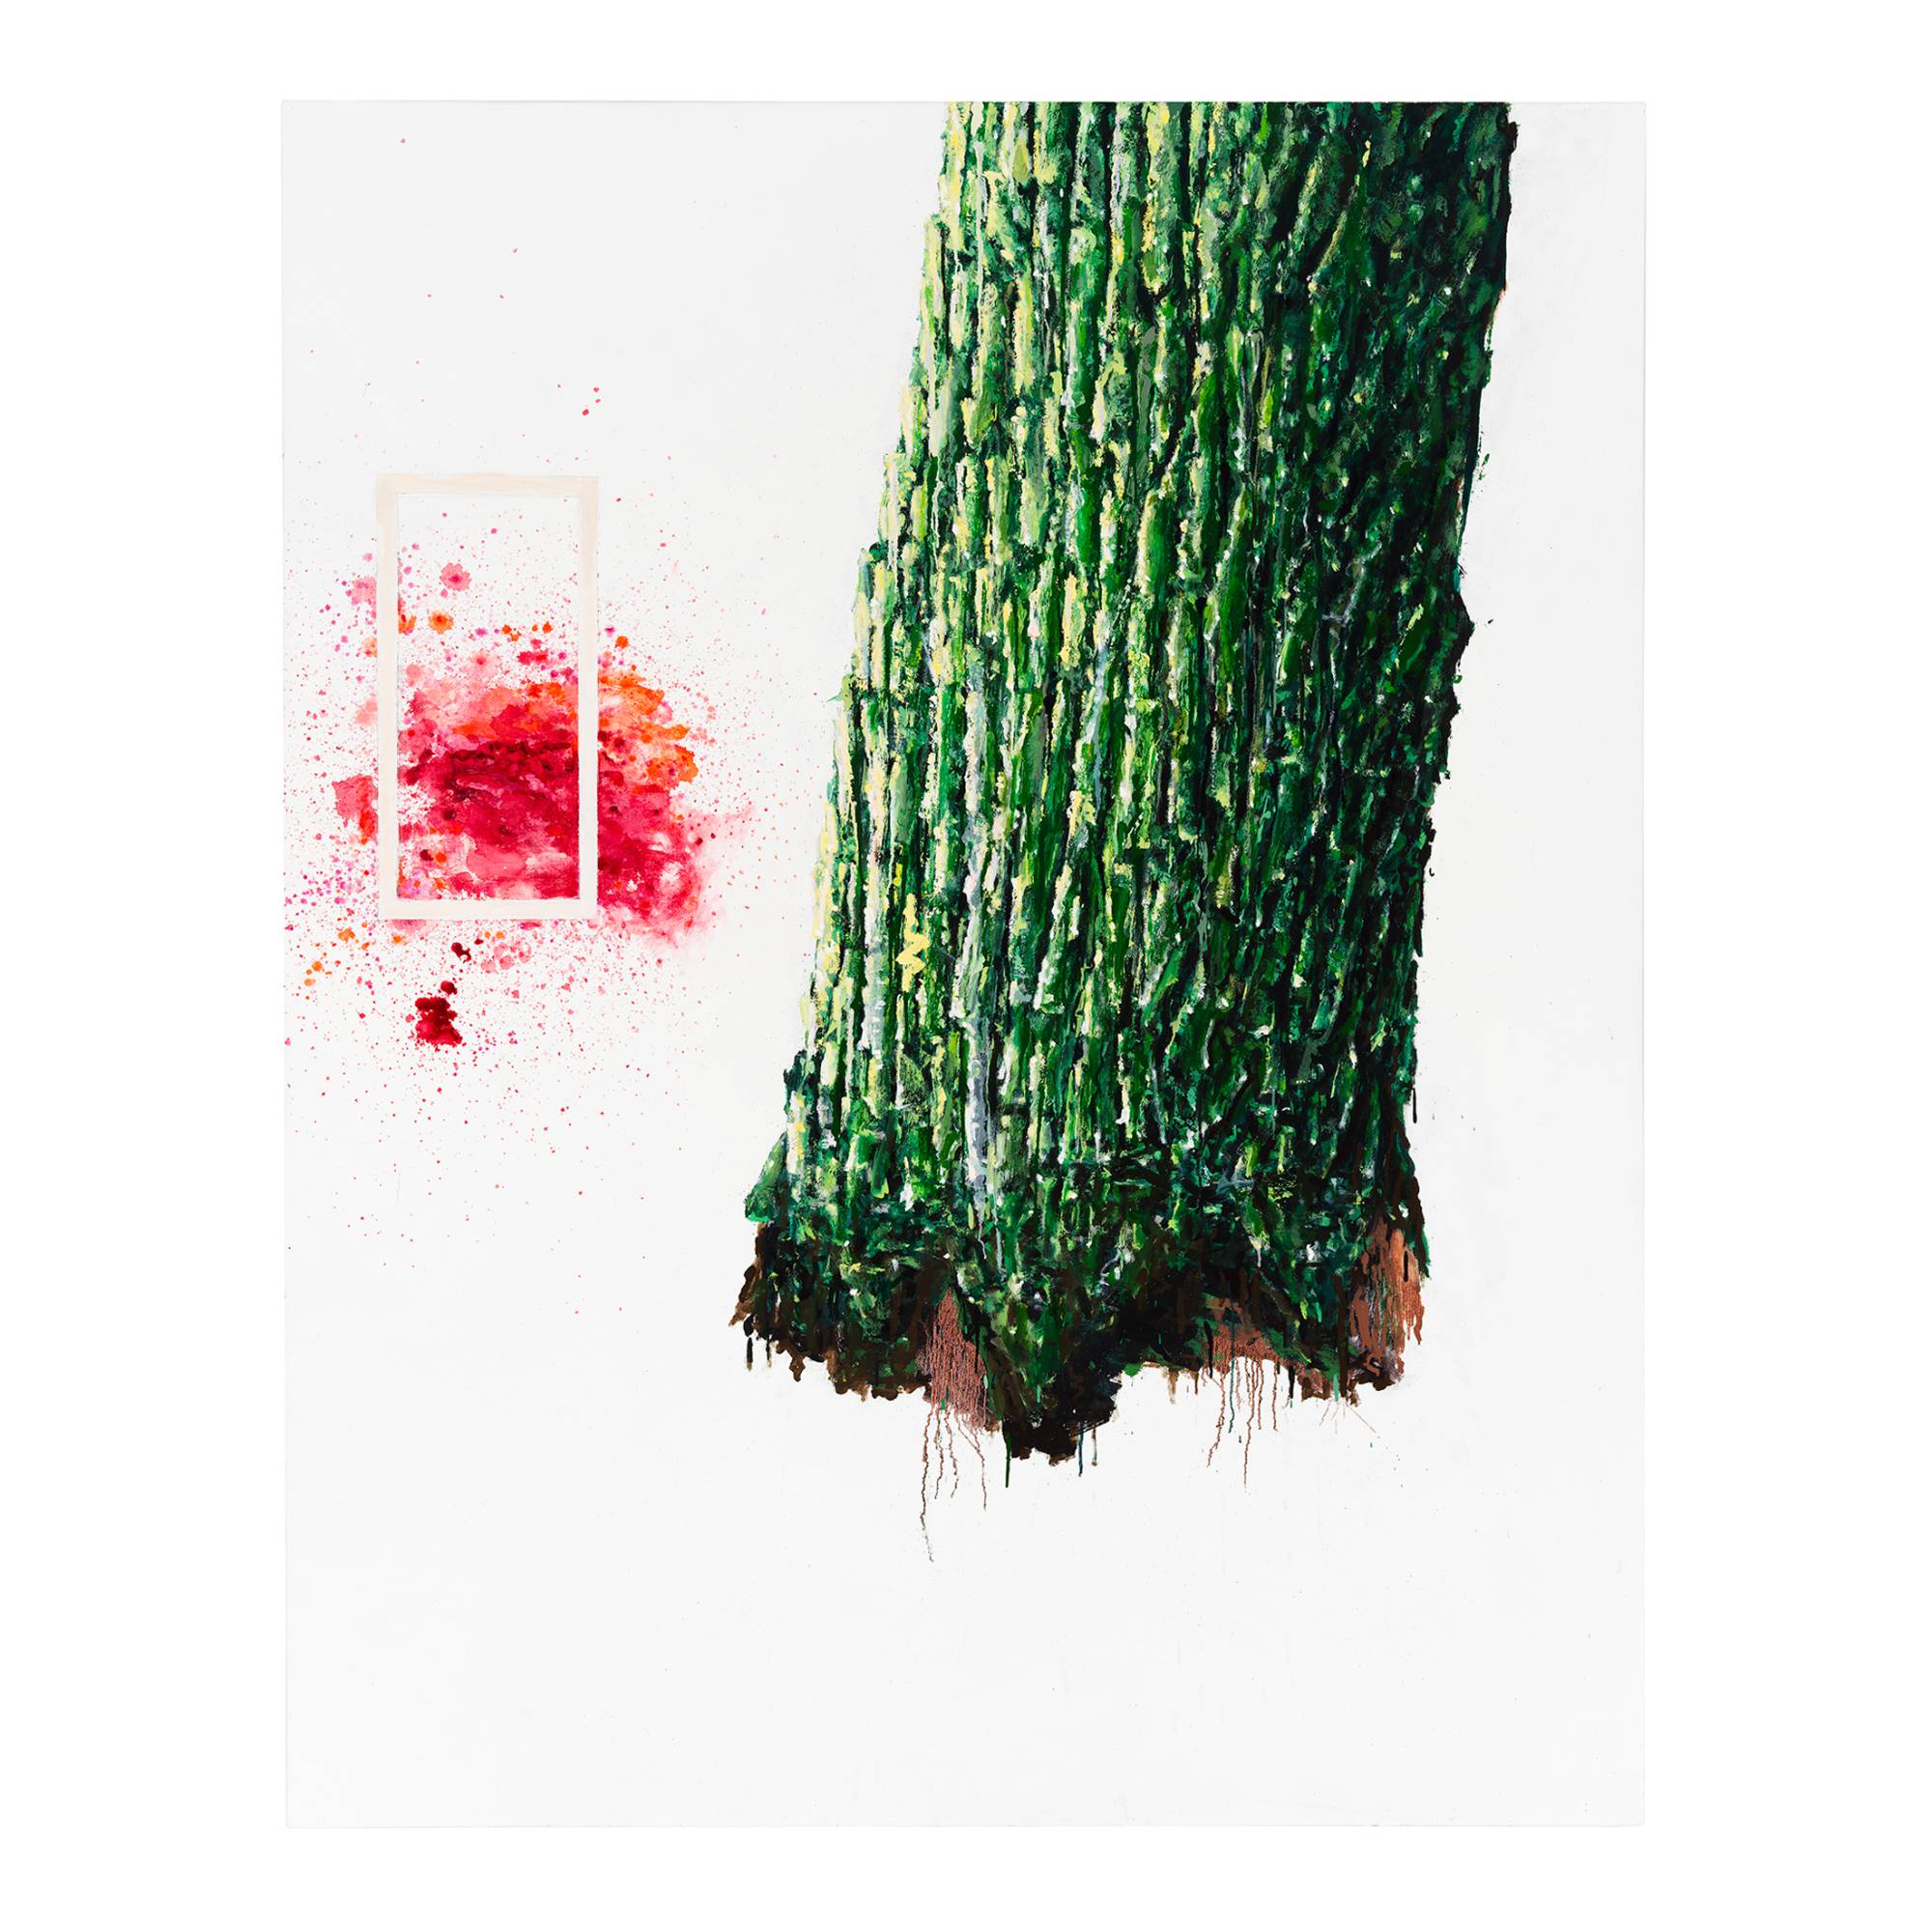 Painting by Vera Klement titled 'Greening' depicting the trunk of a tree floating on a white background next to a red paint splatter with a white rectangular frame floating over/within it